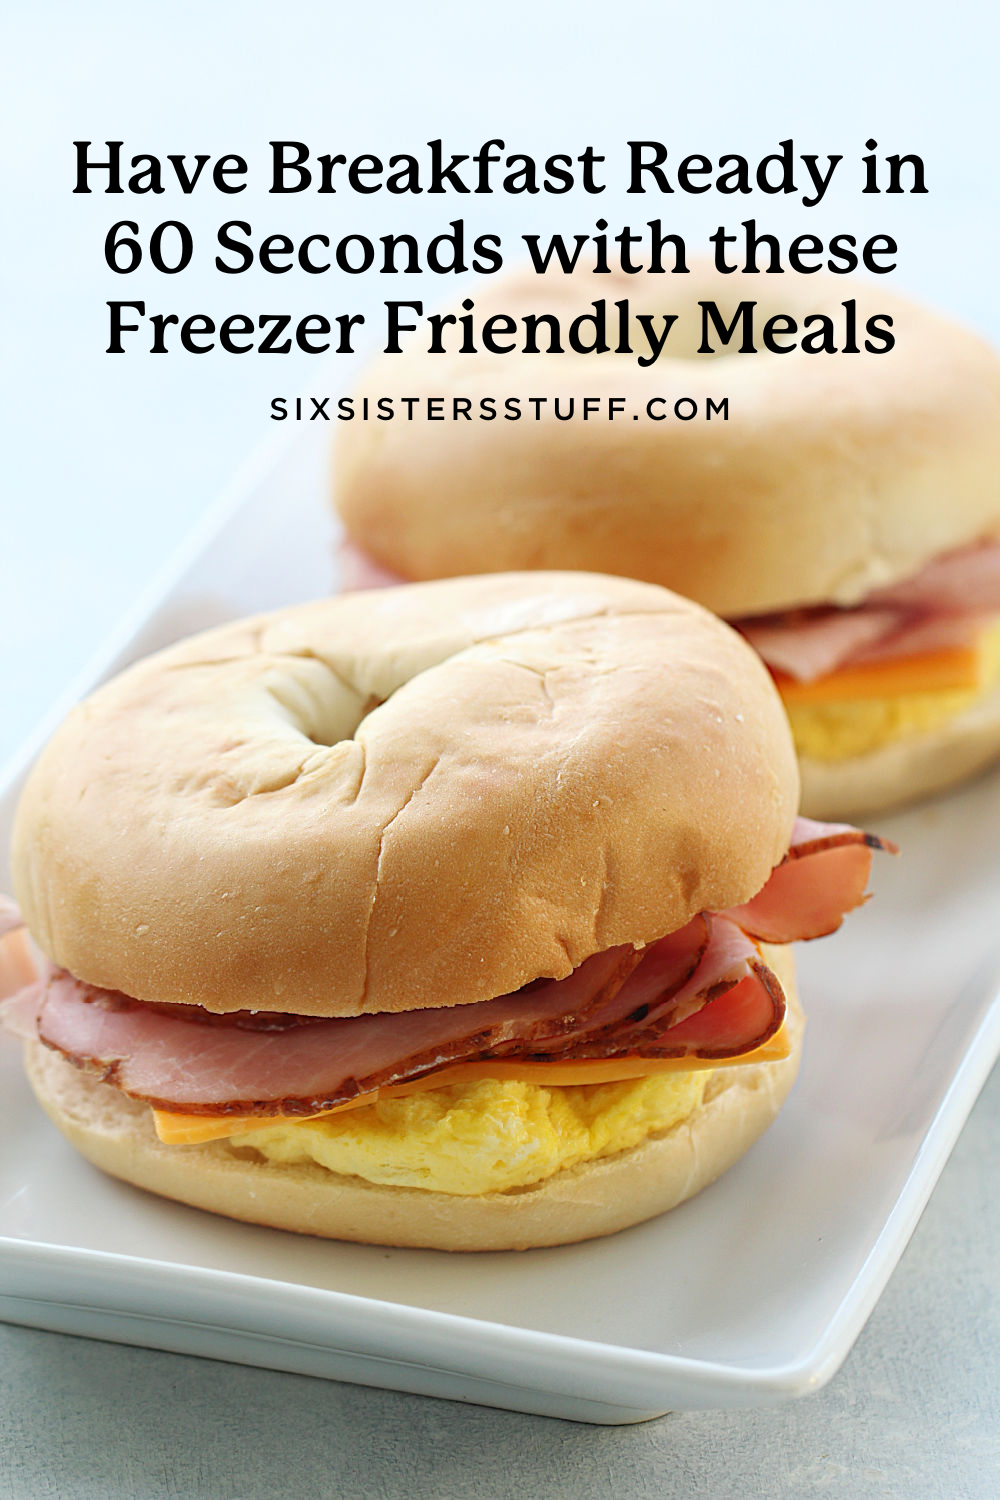 Have Breakfast Ready in 60 Seconds with these Freezer Friendly Meals